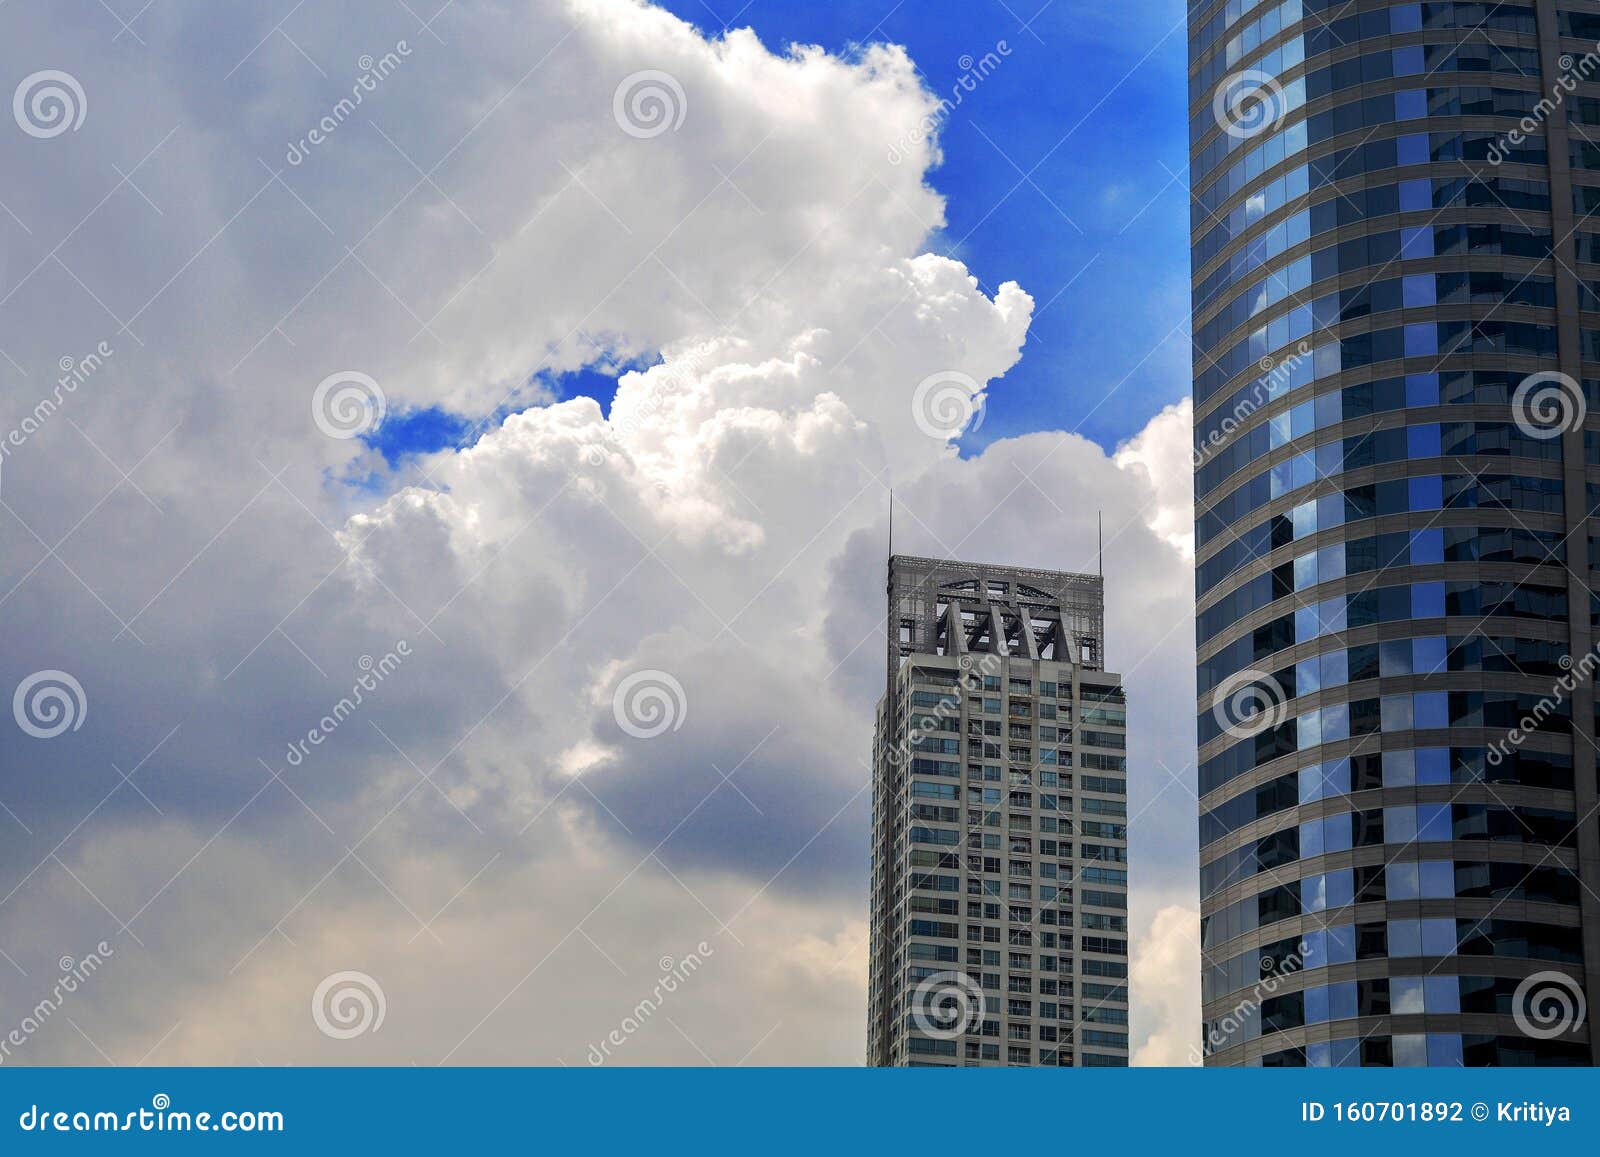 windows of skyscraper business office with blue sky, corporate building in bangkok city